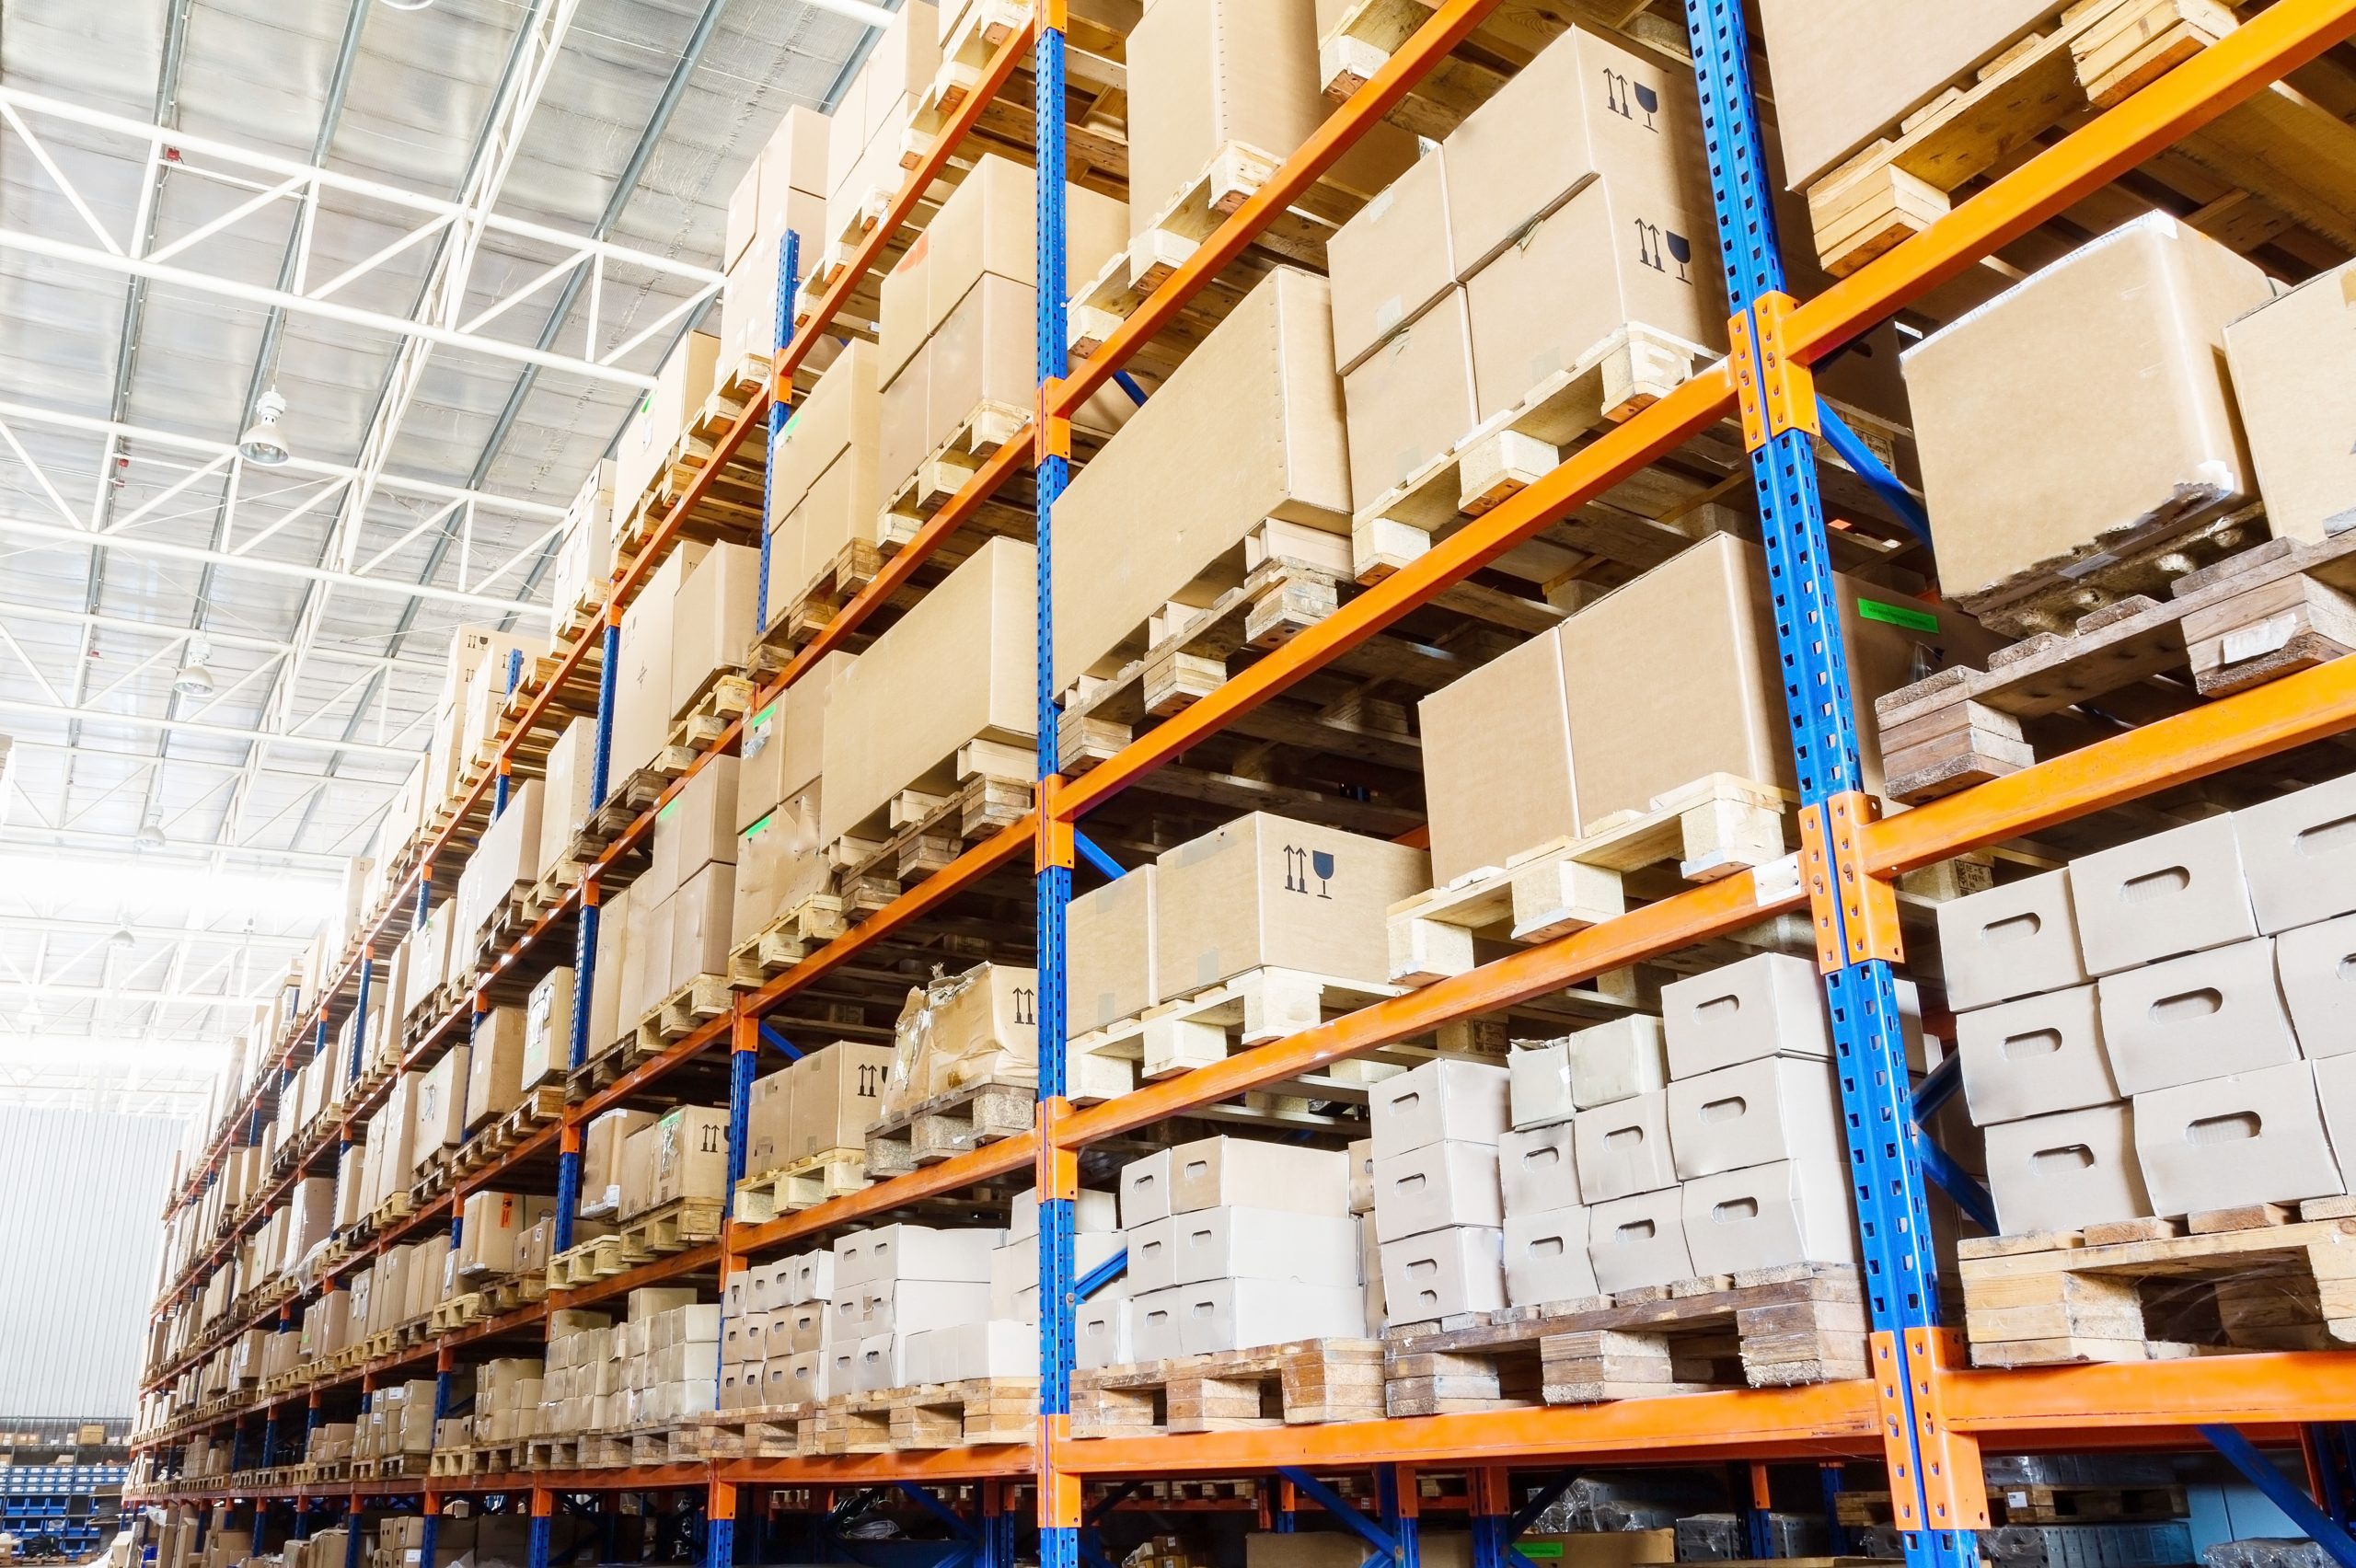 Our Local Warehouse Means Never Having To Wait Days For San Rafael Copier Service Parts | Common Sense Business Solutions